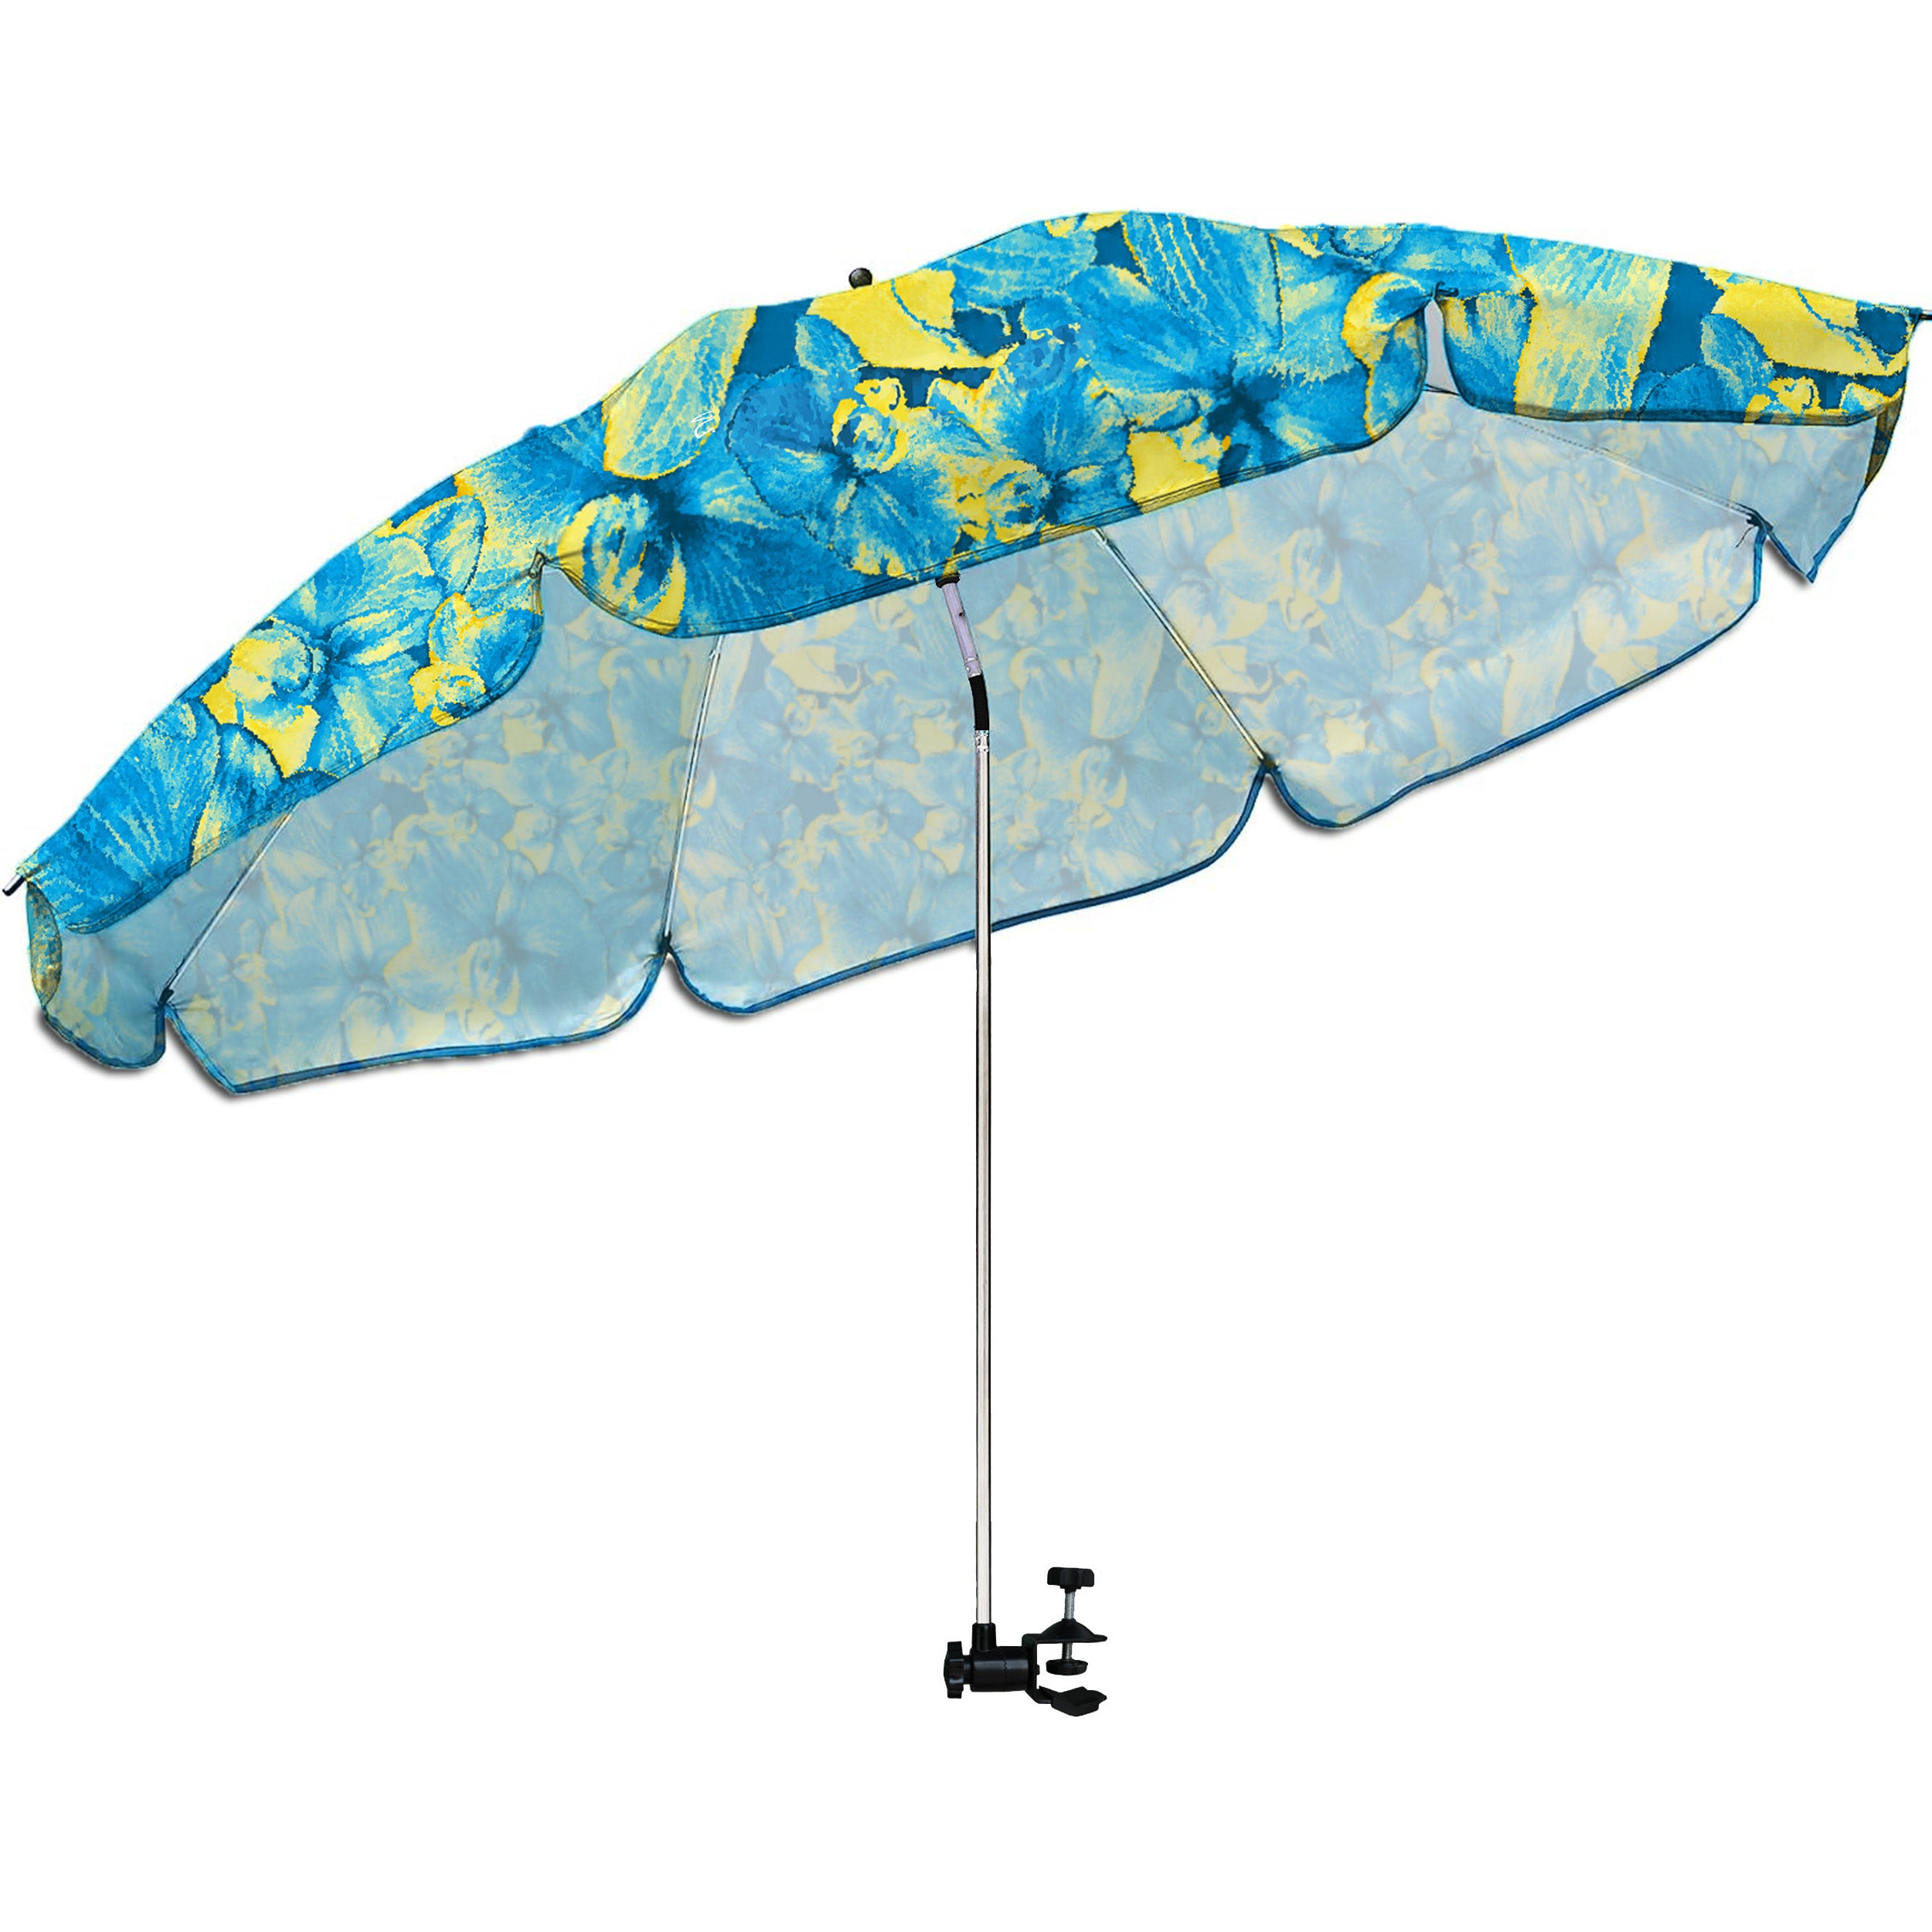 AMMSUN 52 inches XL Chair Umbrella with Universal Clamp Vibrant Flowers